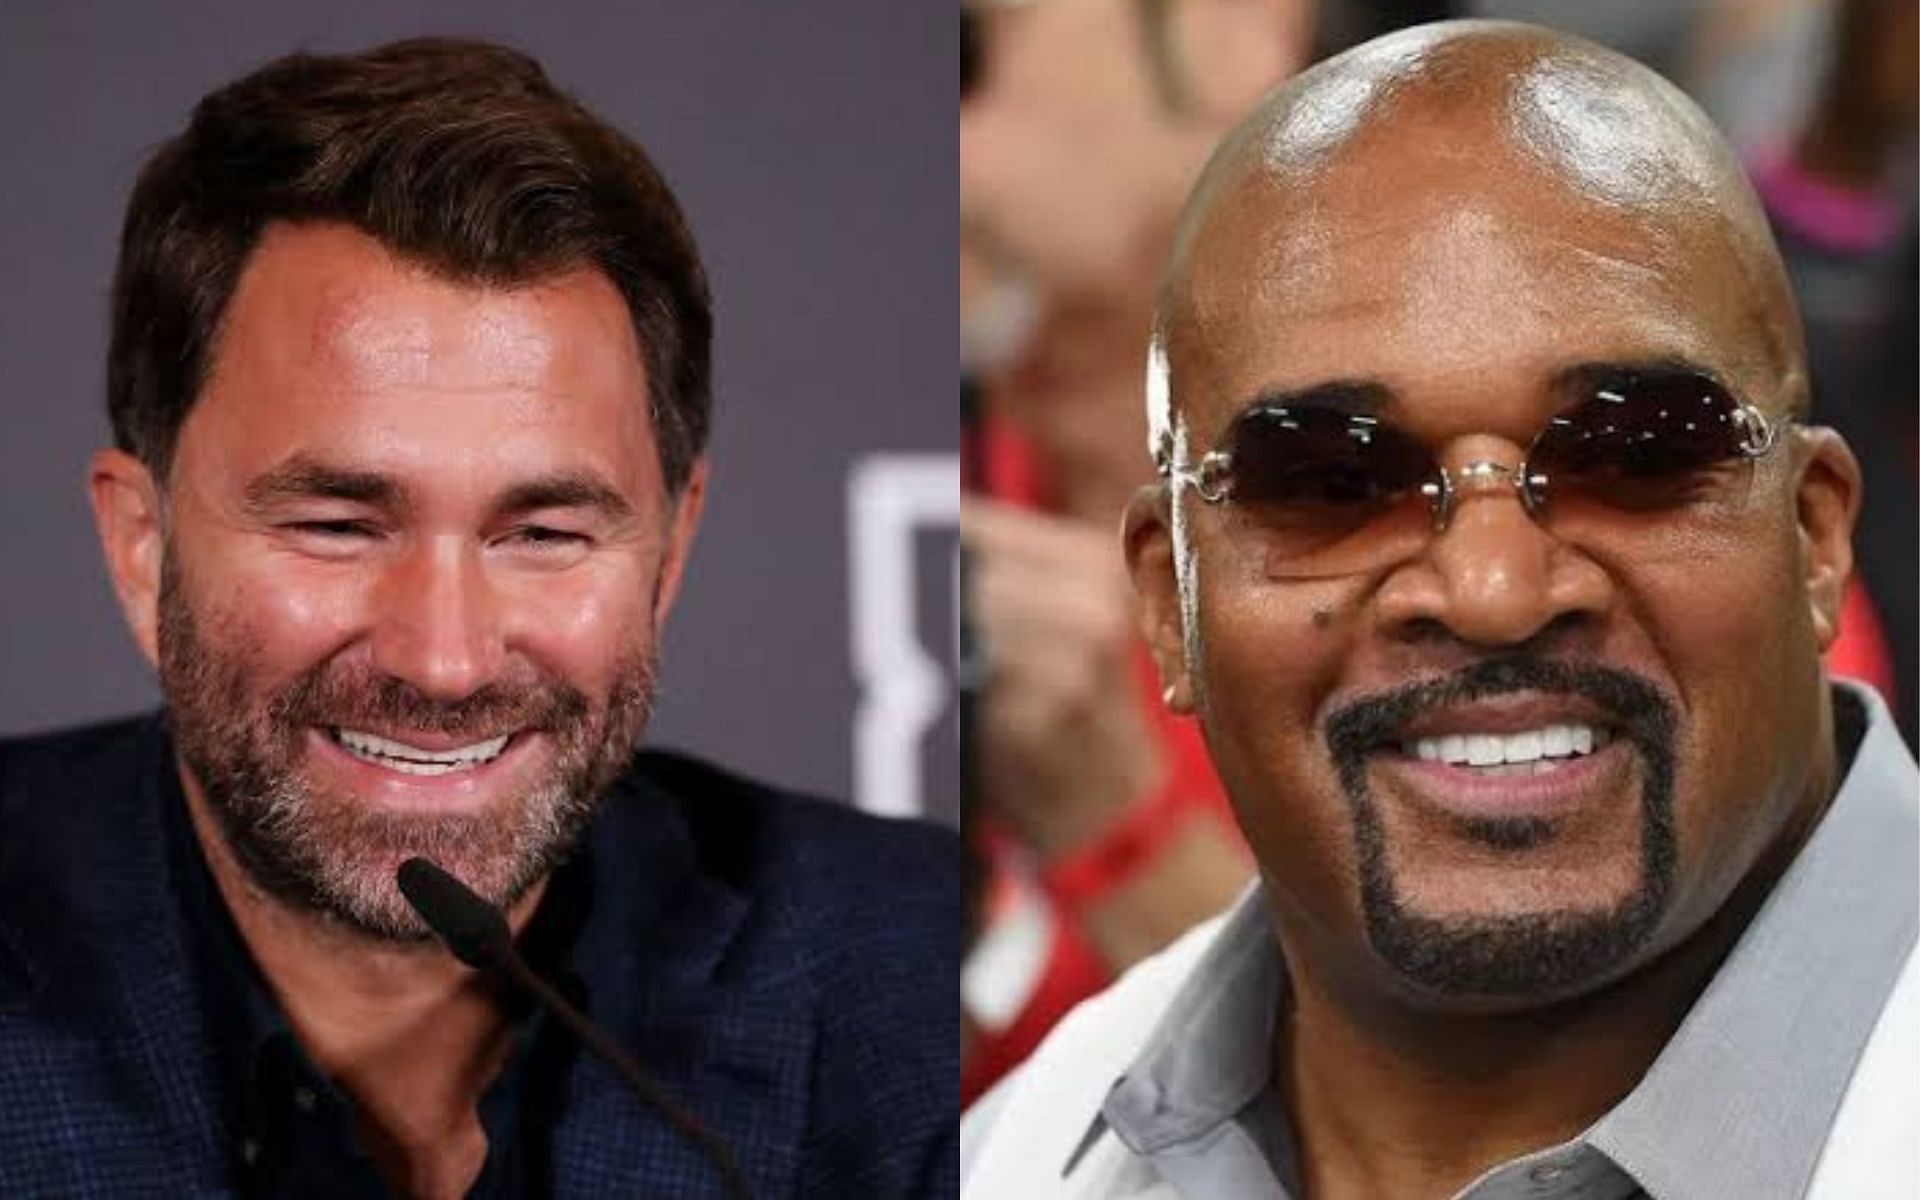 Eddie Hearn (left) and Leonard Ellerbe (right) (Photos by Getty Images)